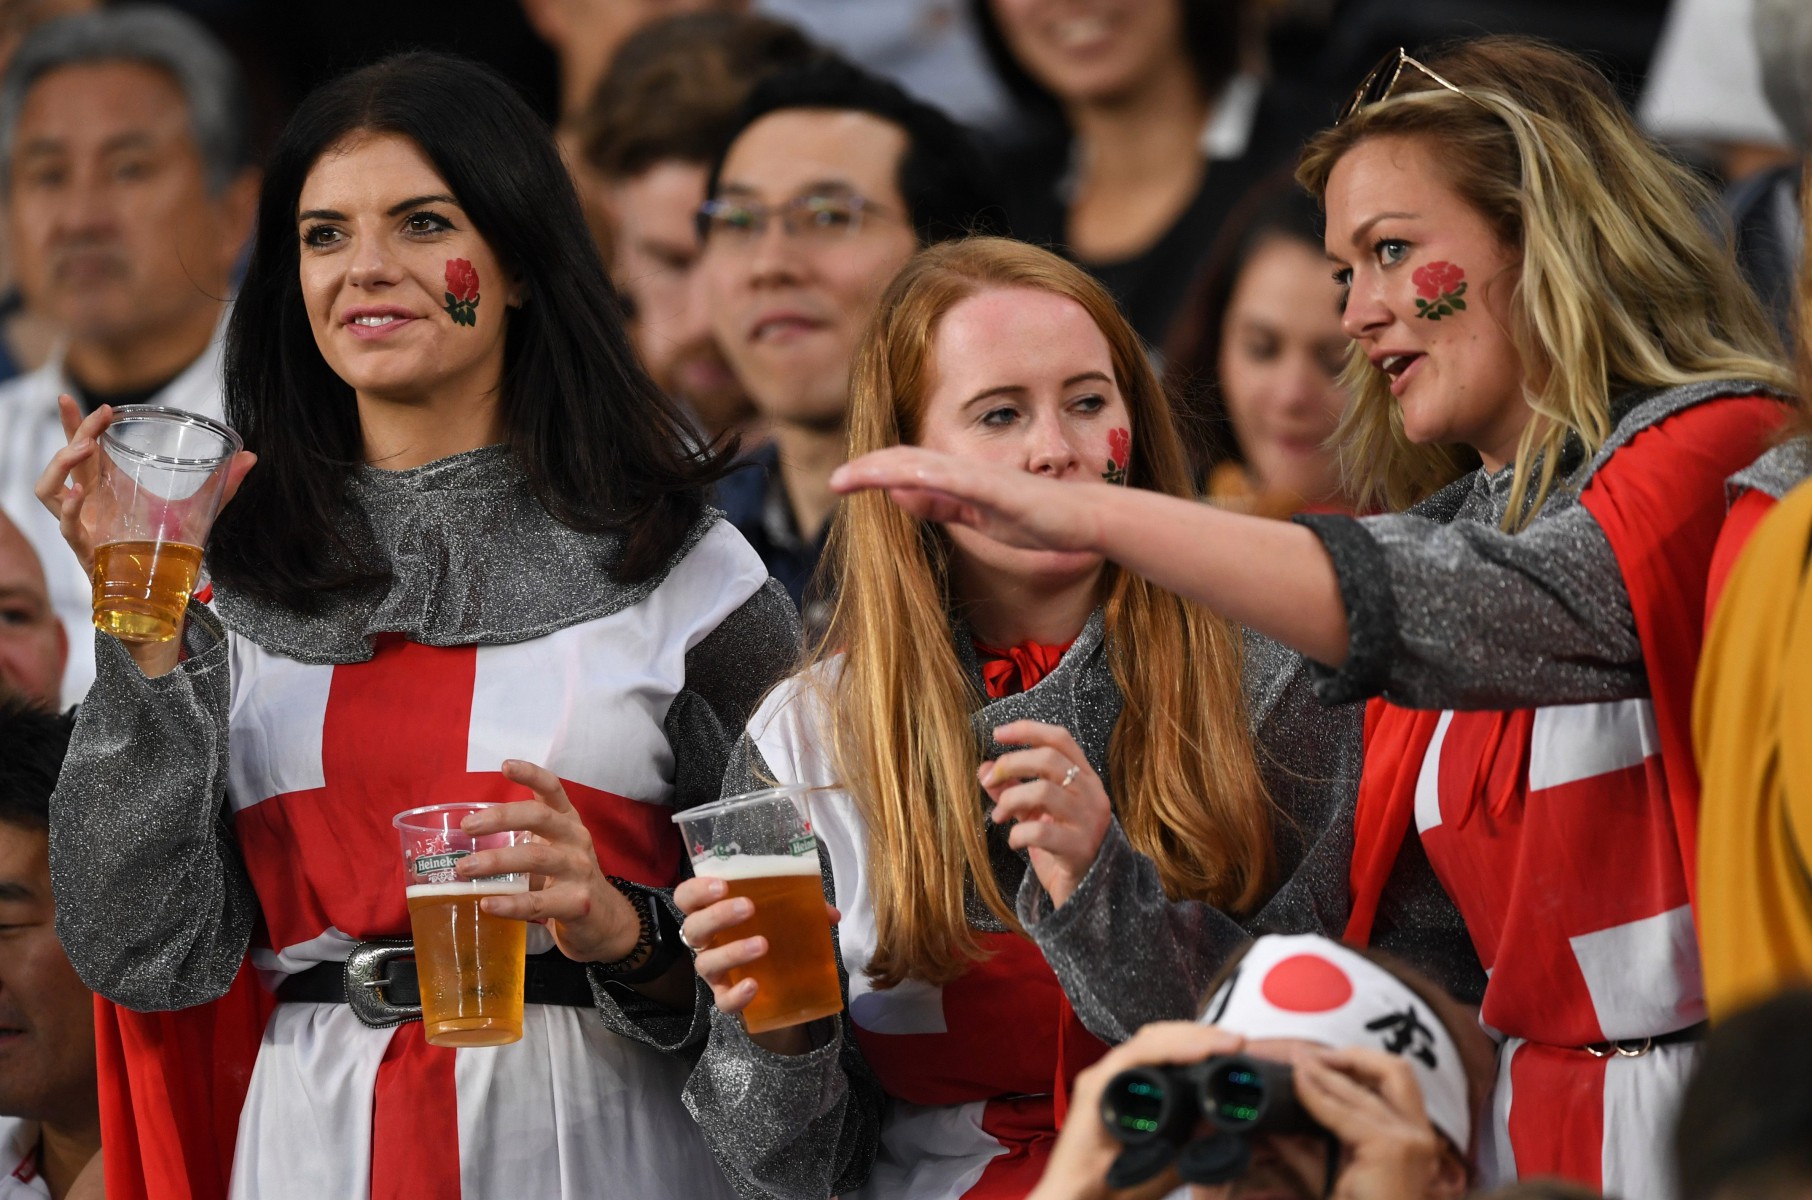 Supporters will start getting in the mood from as early as 7am  hoping England can put one over South Africa in the 9am kick-off in Japan